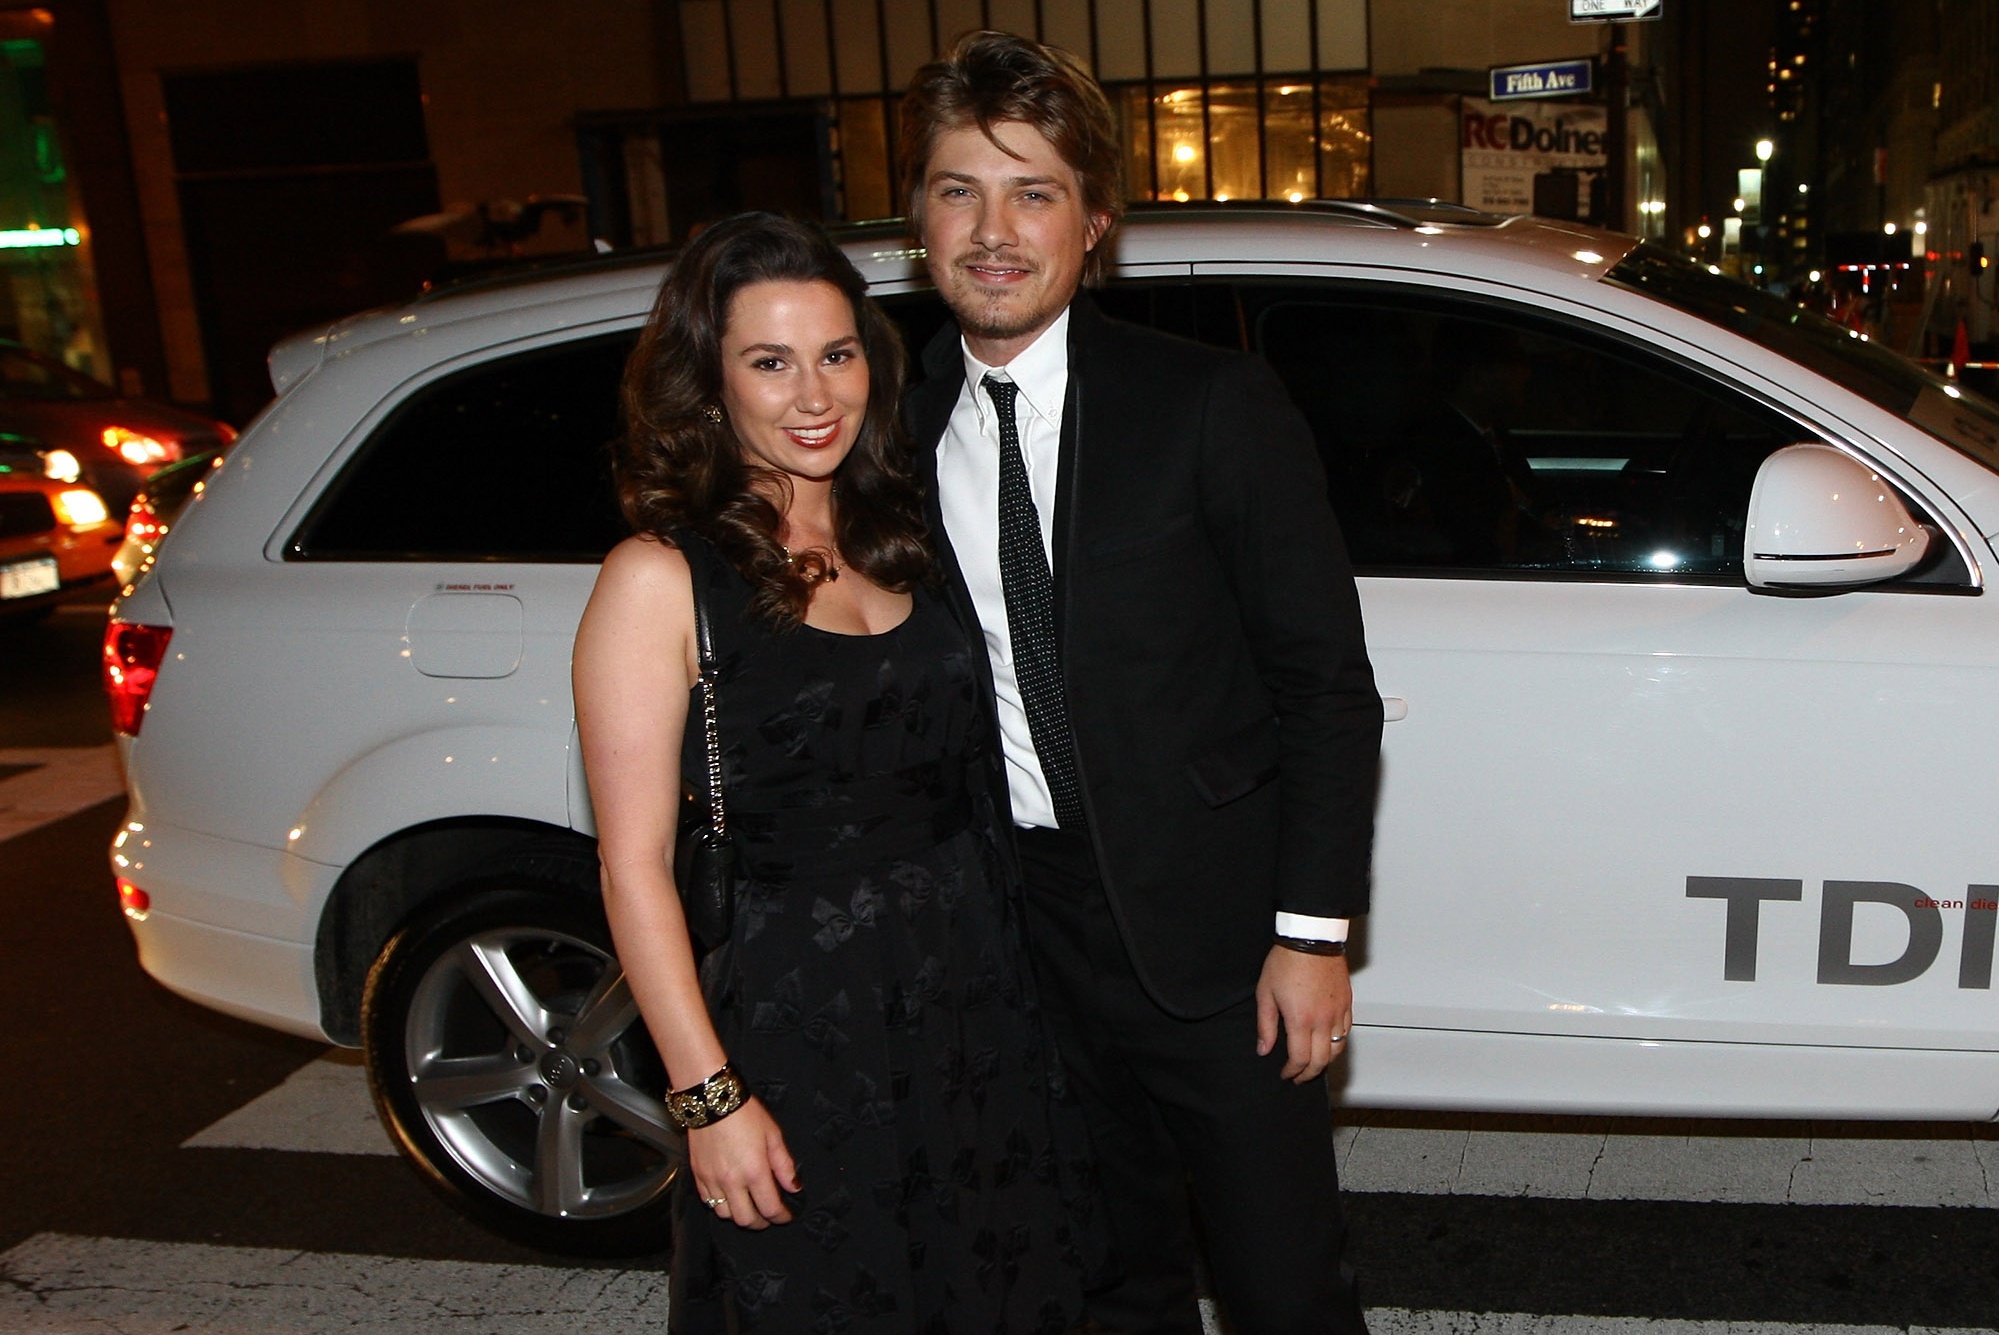 Taylor Hanson and wife Natalie